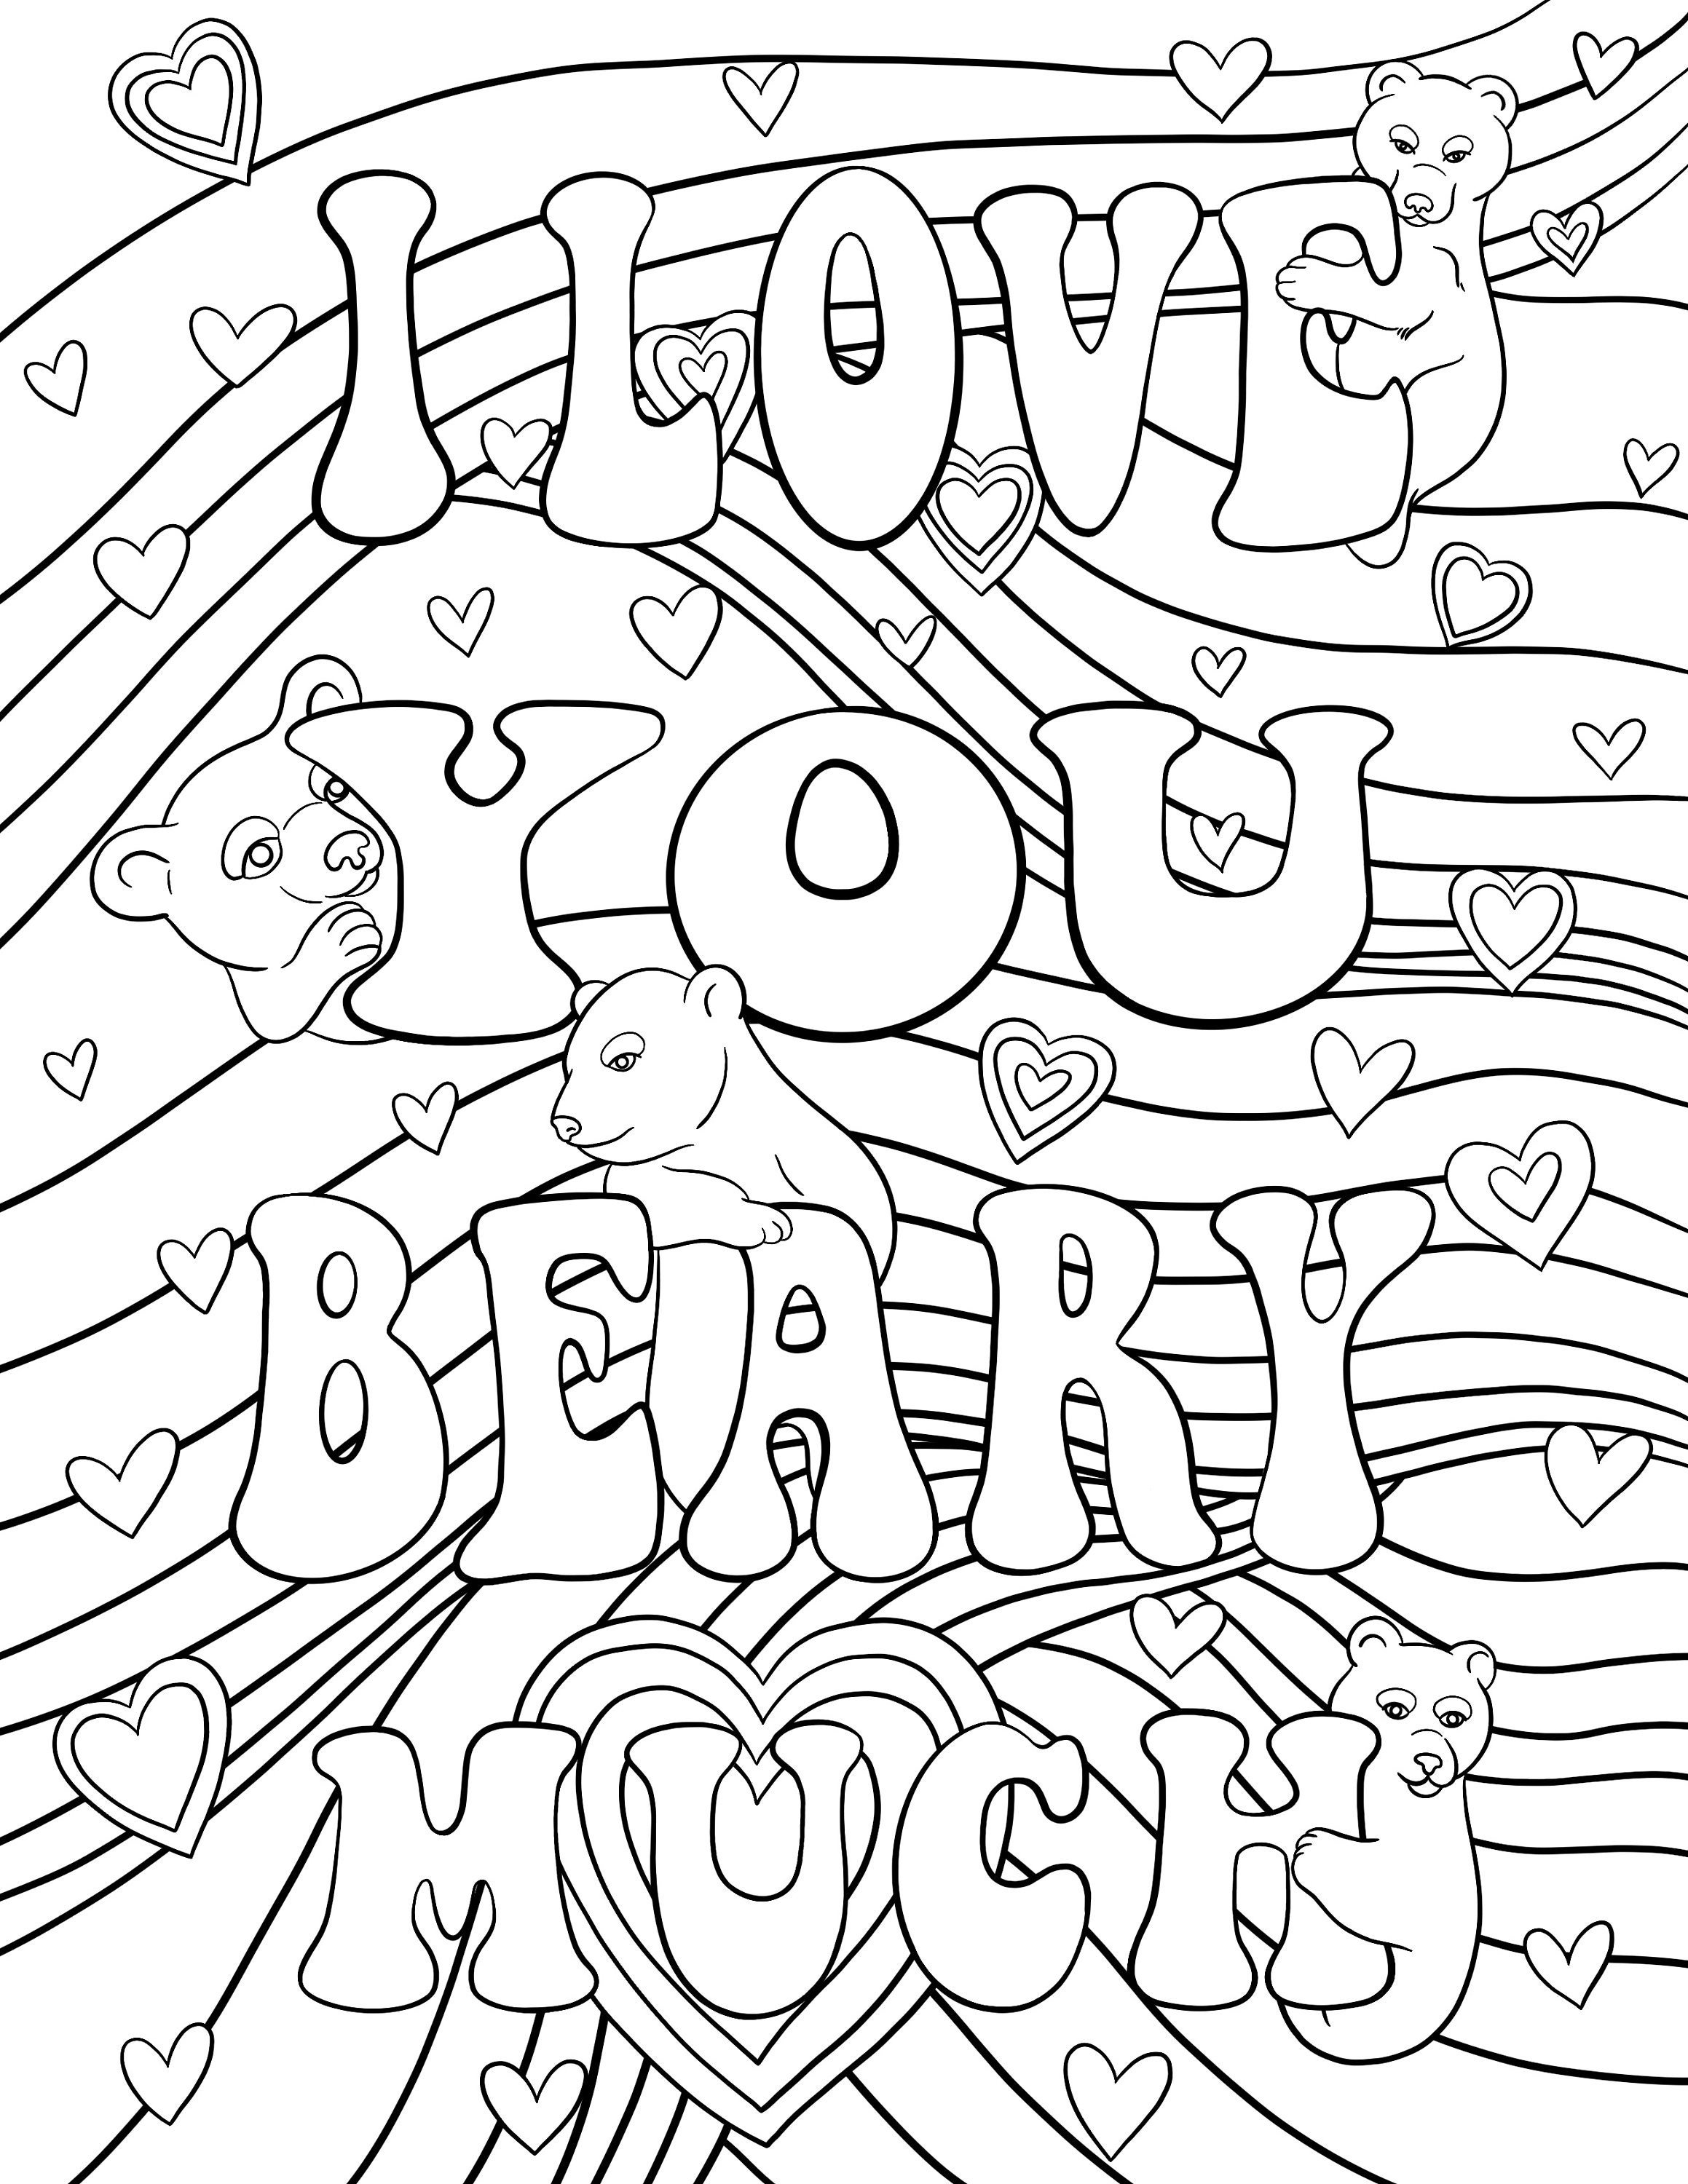 I love you beary much printable coloring page for kids adults instant download download now